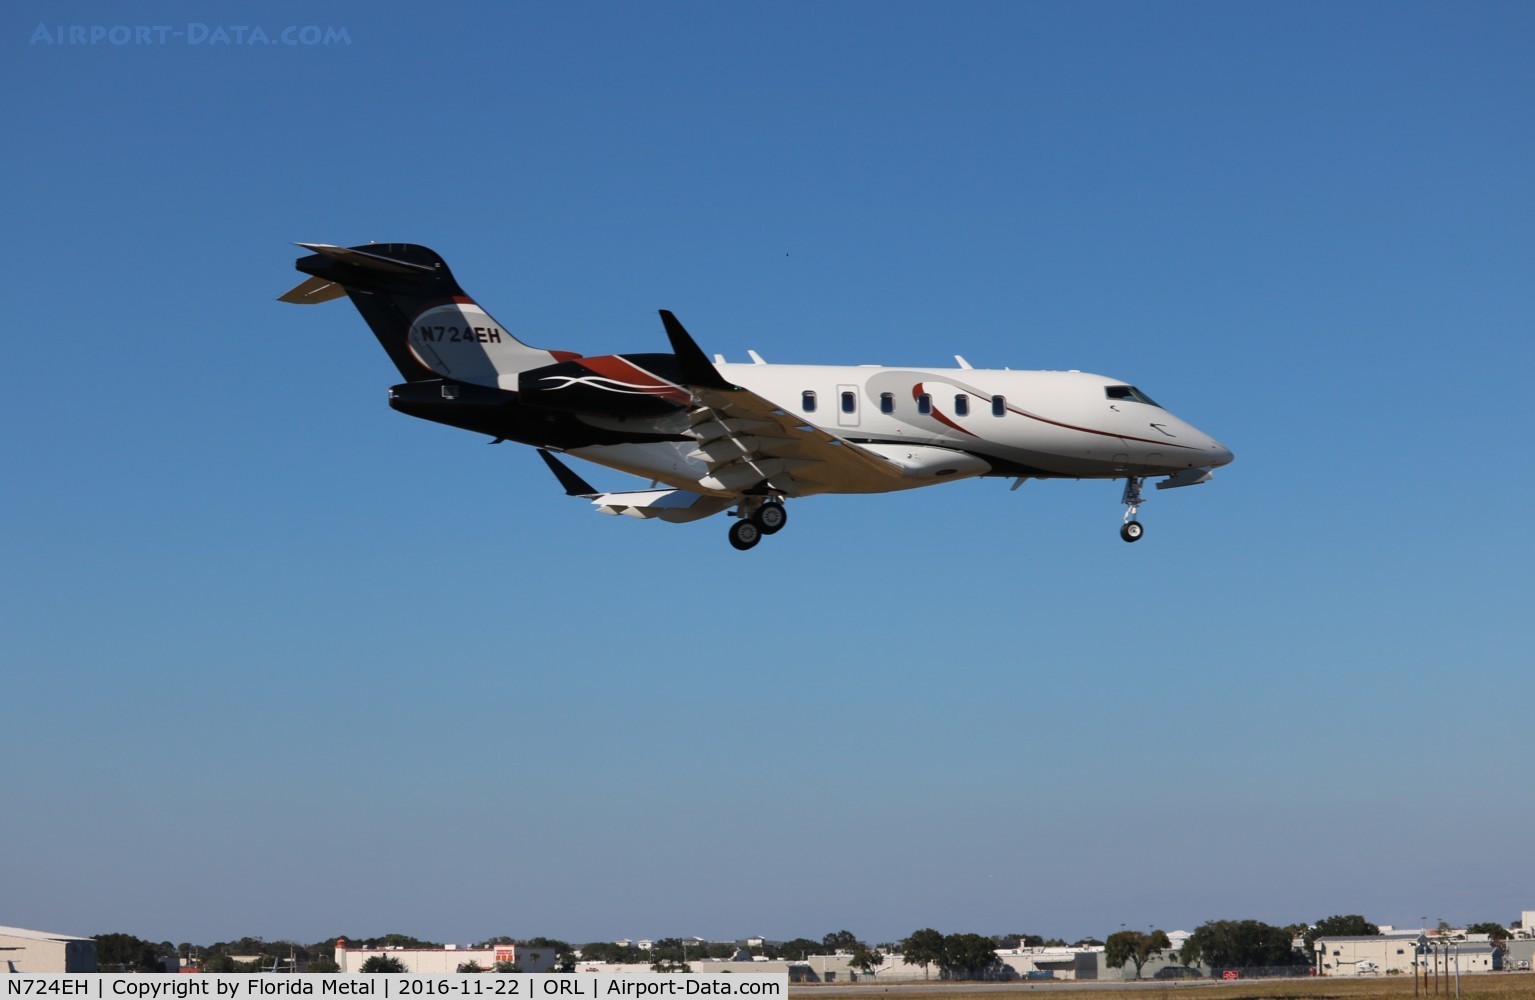 N724EH, 2016 Bombardier Challenger 350 (BD-100-1A10) C/N 20613, Challenger 350